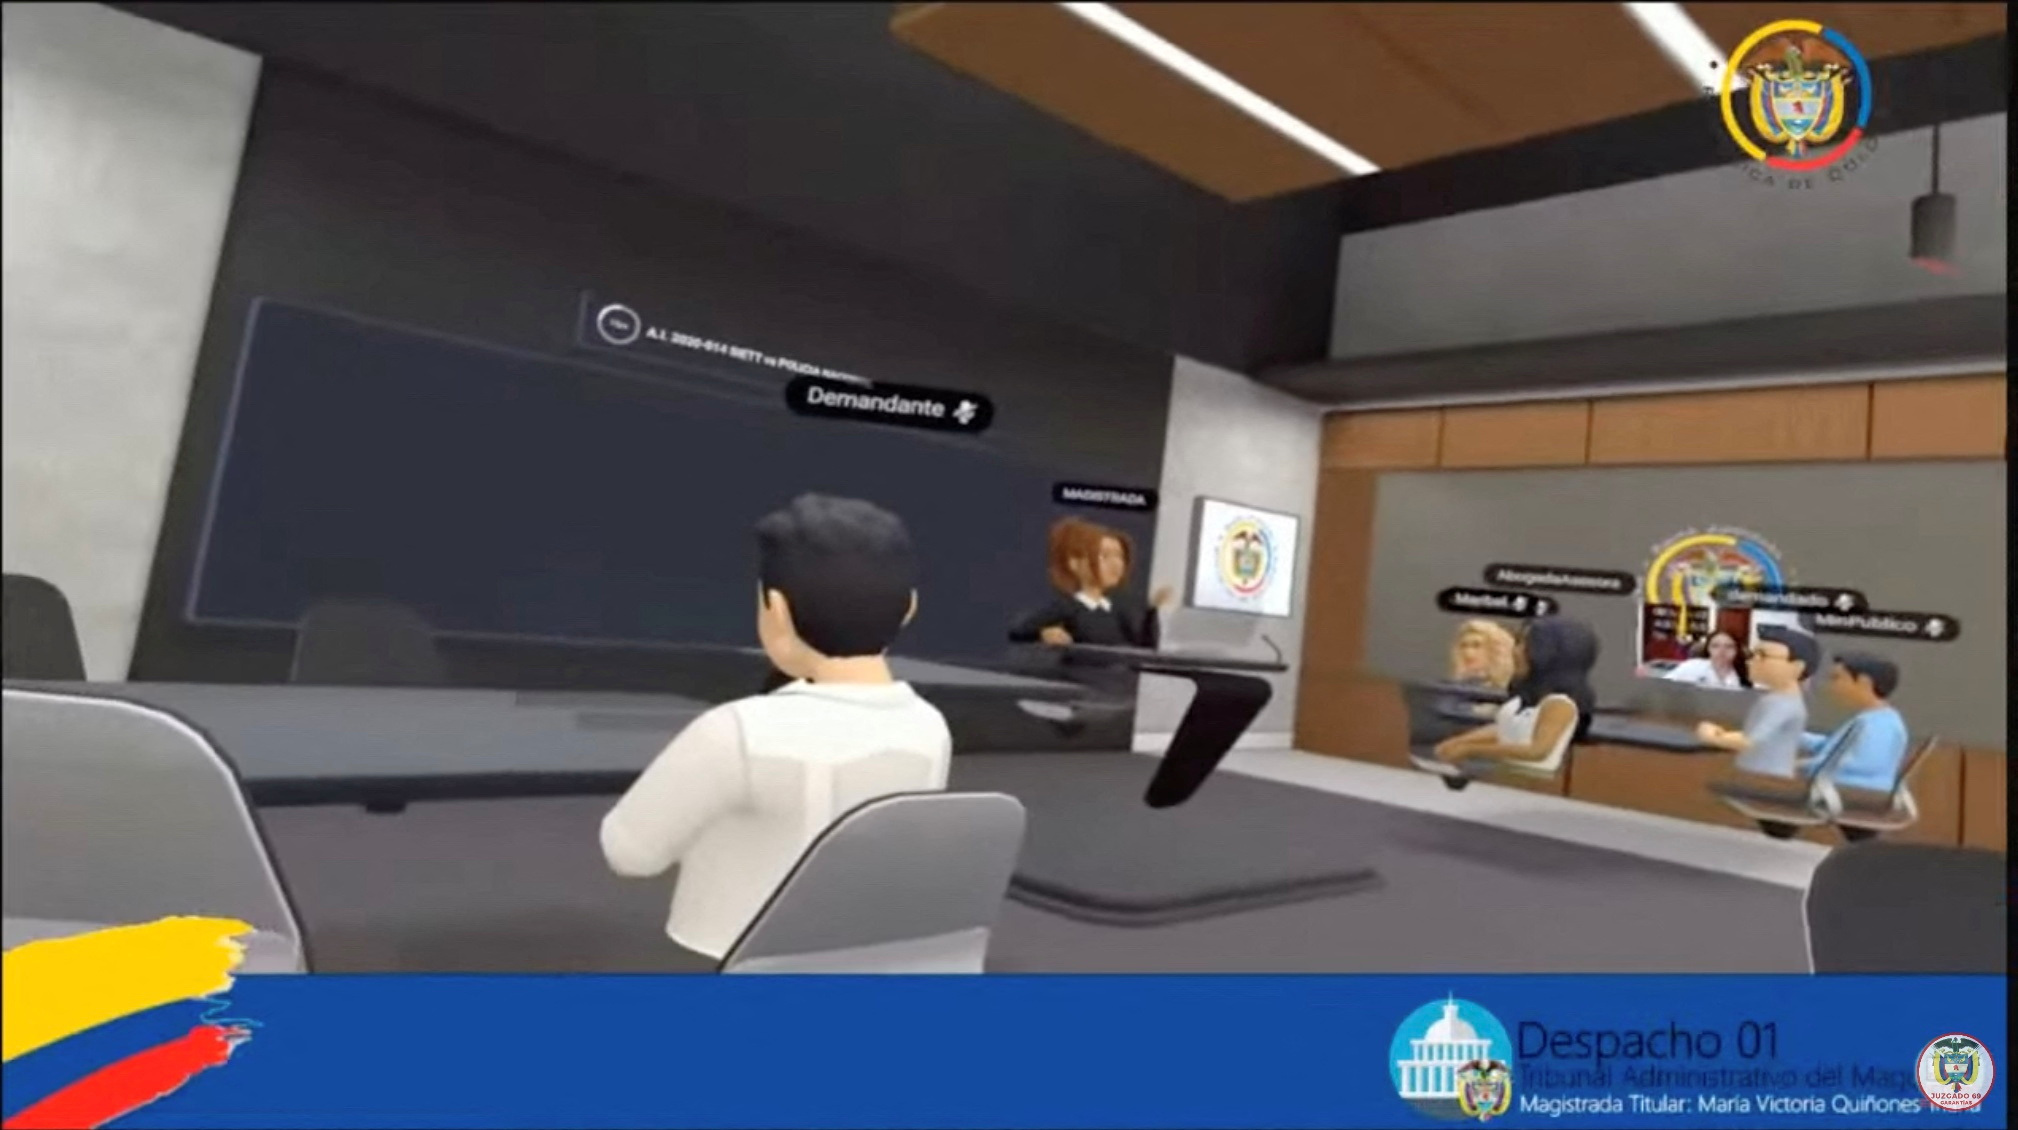 Colombian court hearing held in the Metaverse